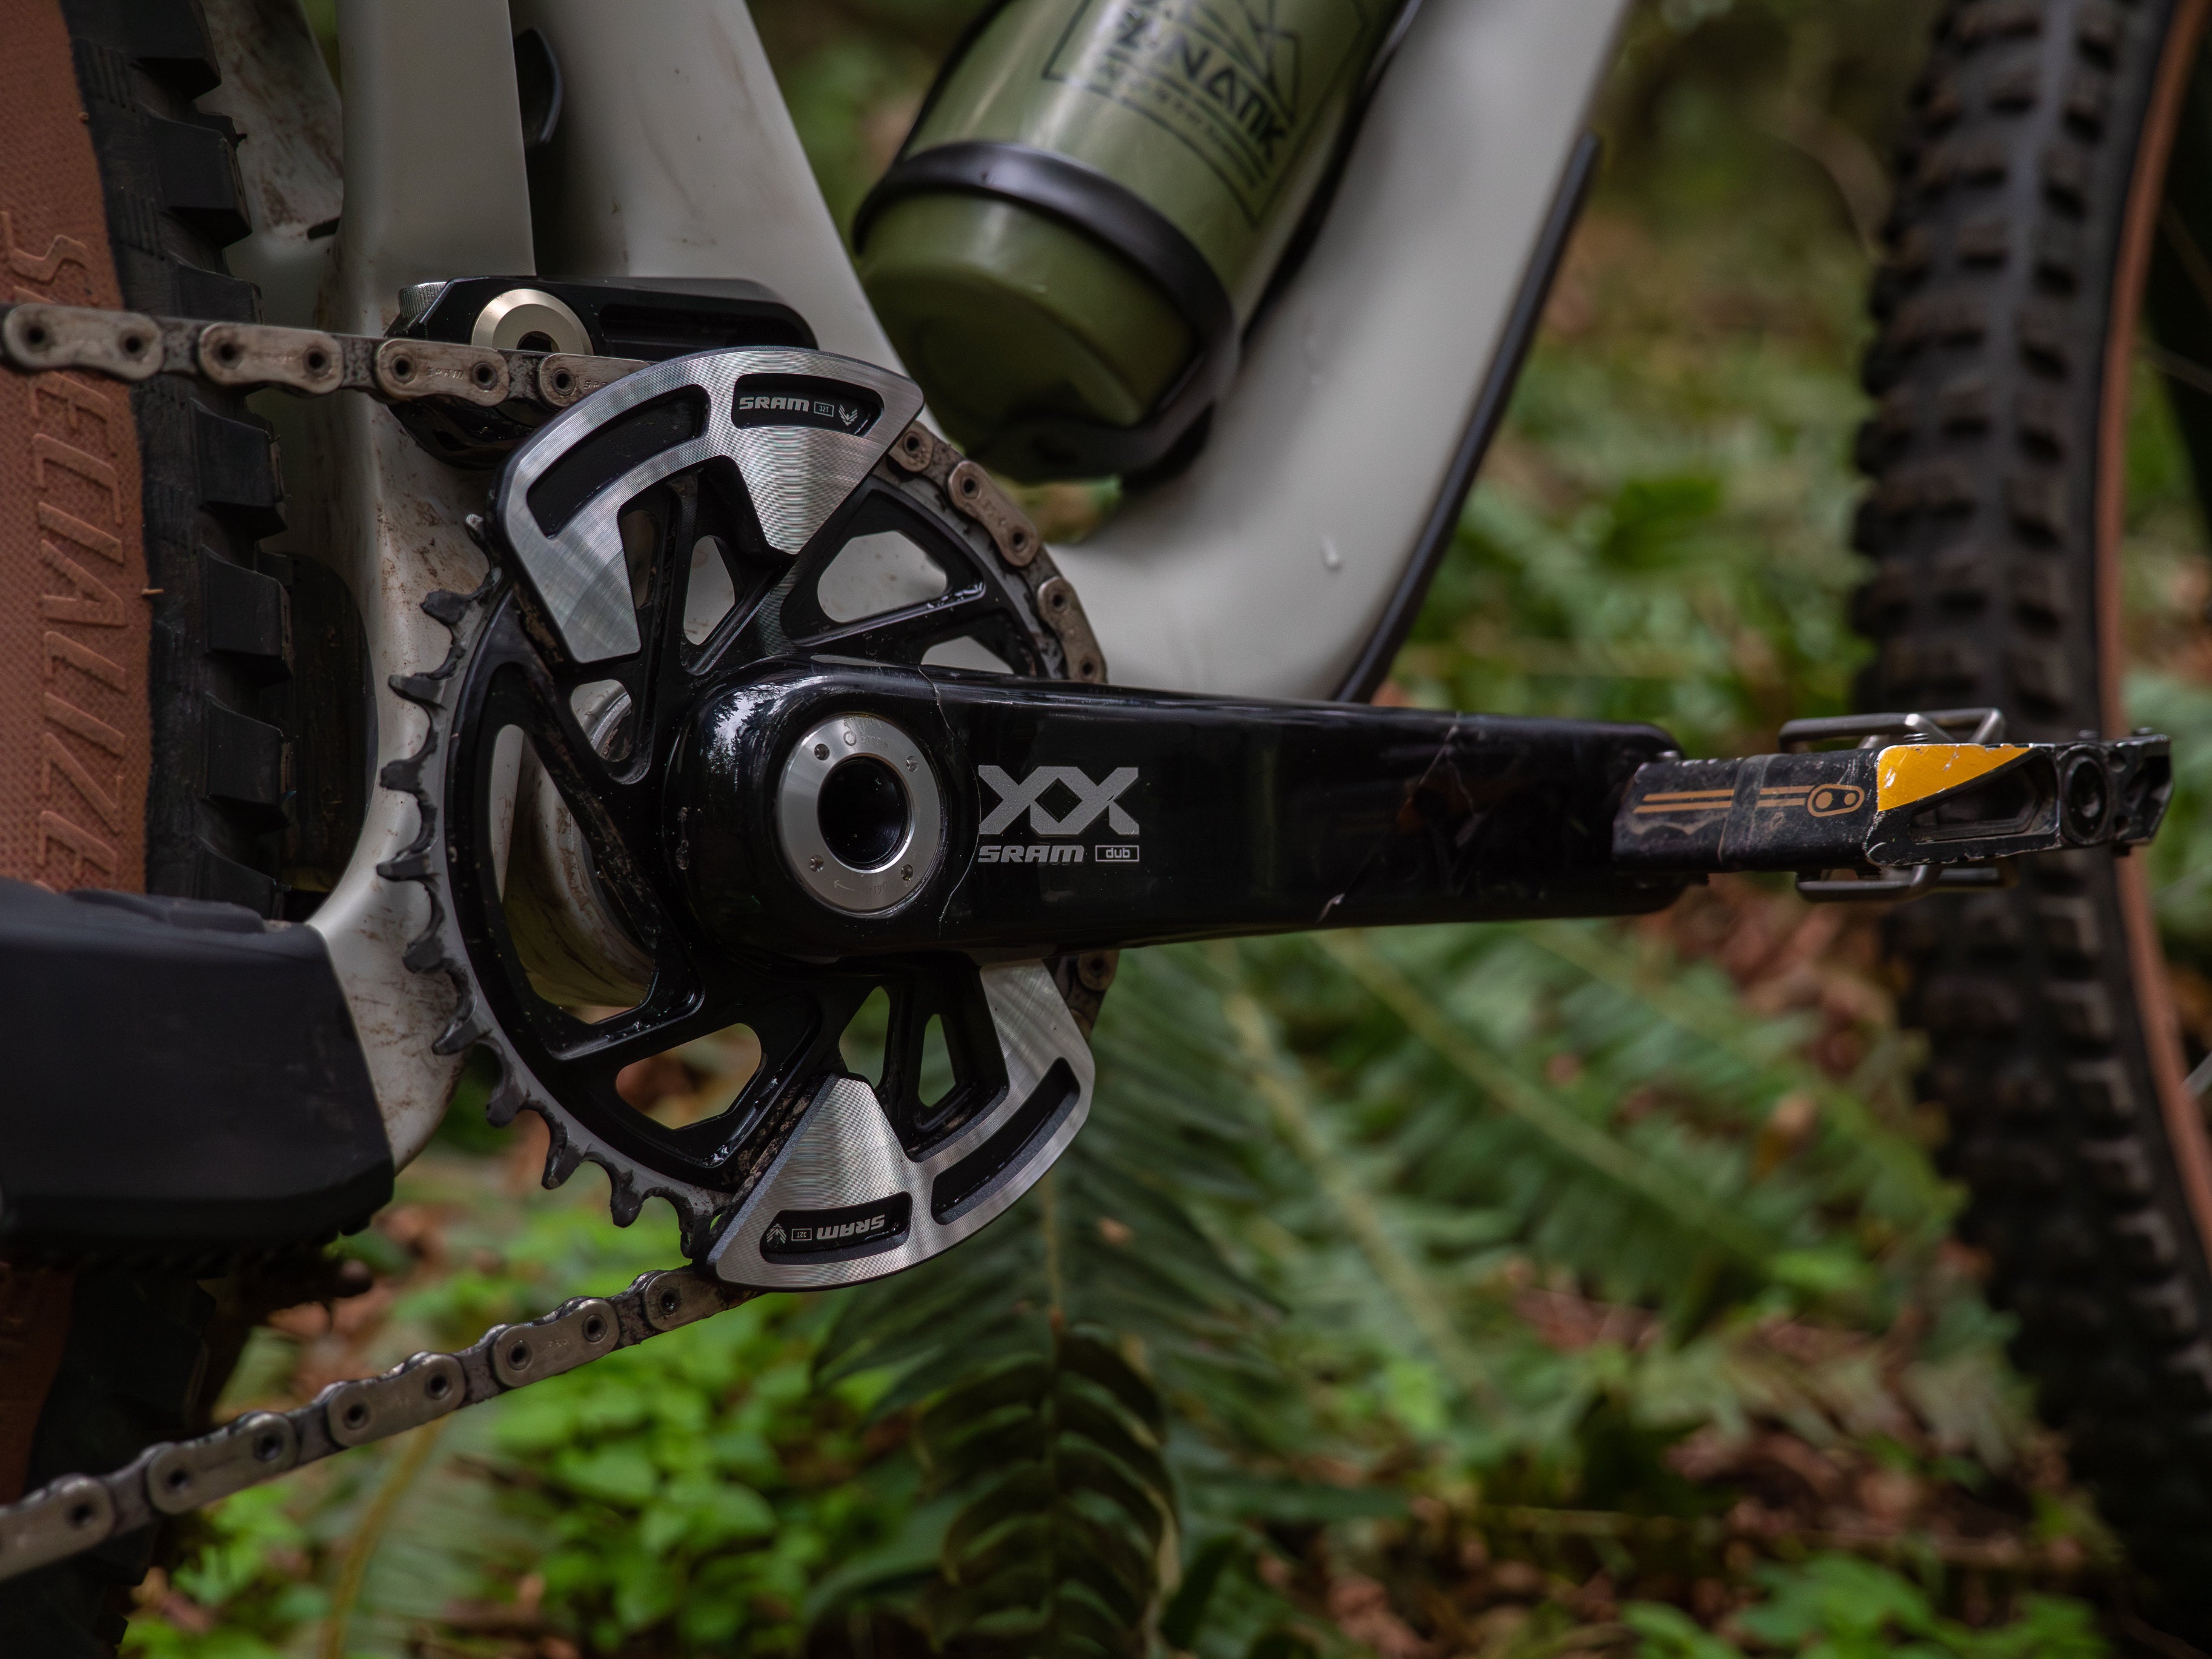 Sram XX Eagle Transmission Review and Bike Check